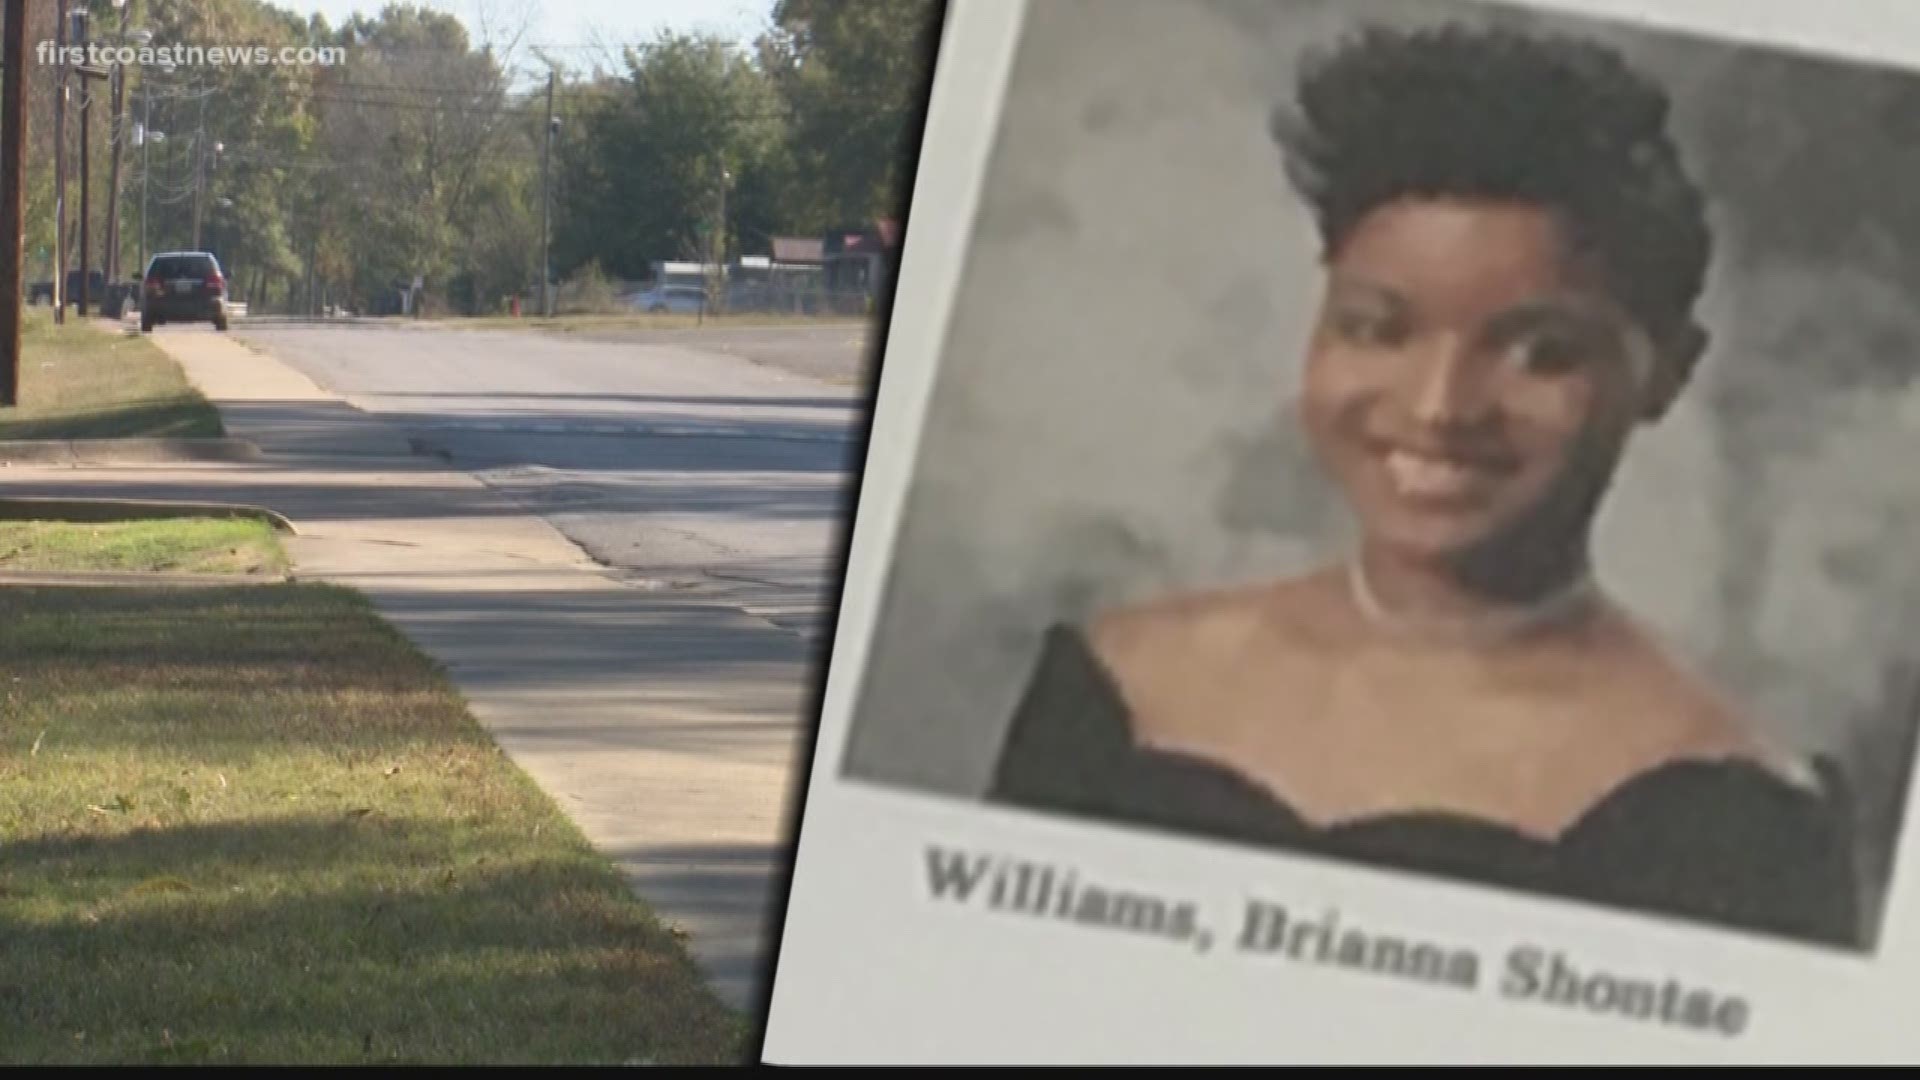 A child's remains (unknown) were found in Alabama and the mother of missing Taylor Williams is now under arrest. What's next in the investigation?